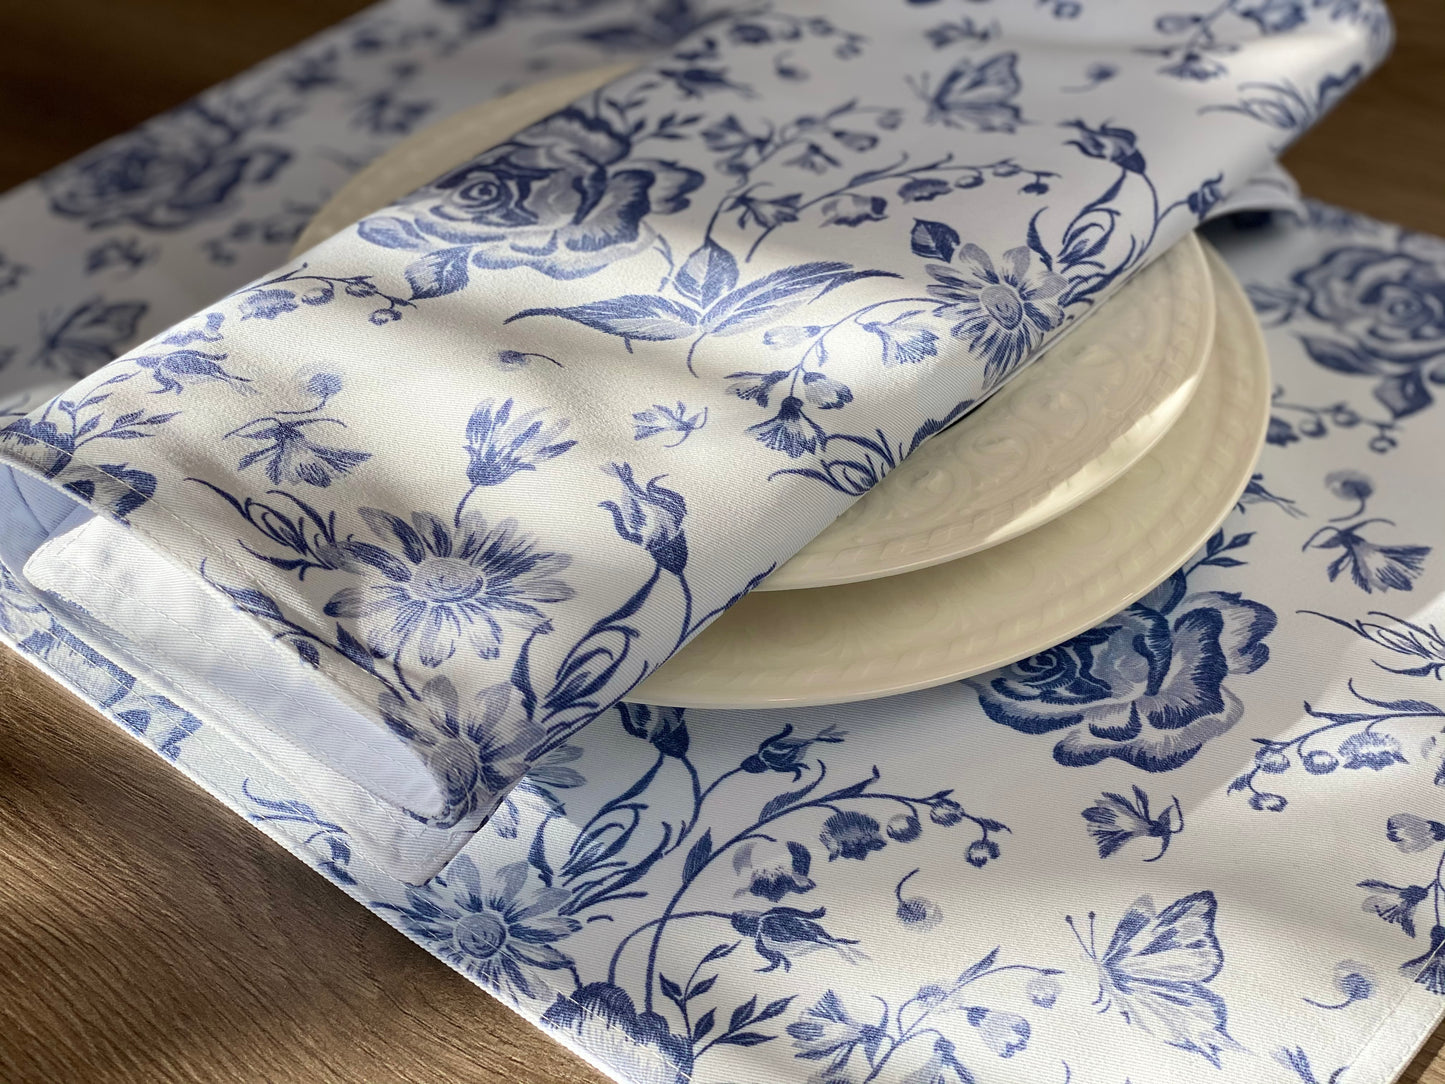 Set of 4 Rose Garden Placemat, blue roses, and chamomiles floral Printed placemat. 14" x 19". Washable Cotton Placemat for fall dining table